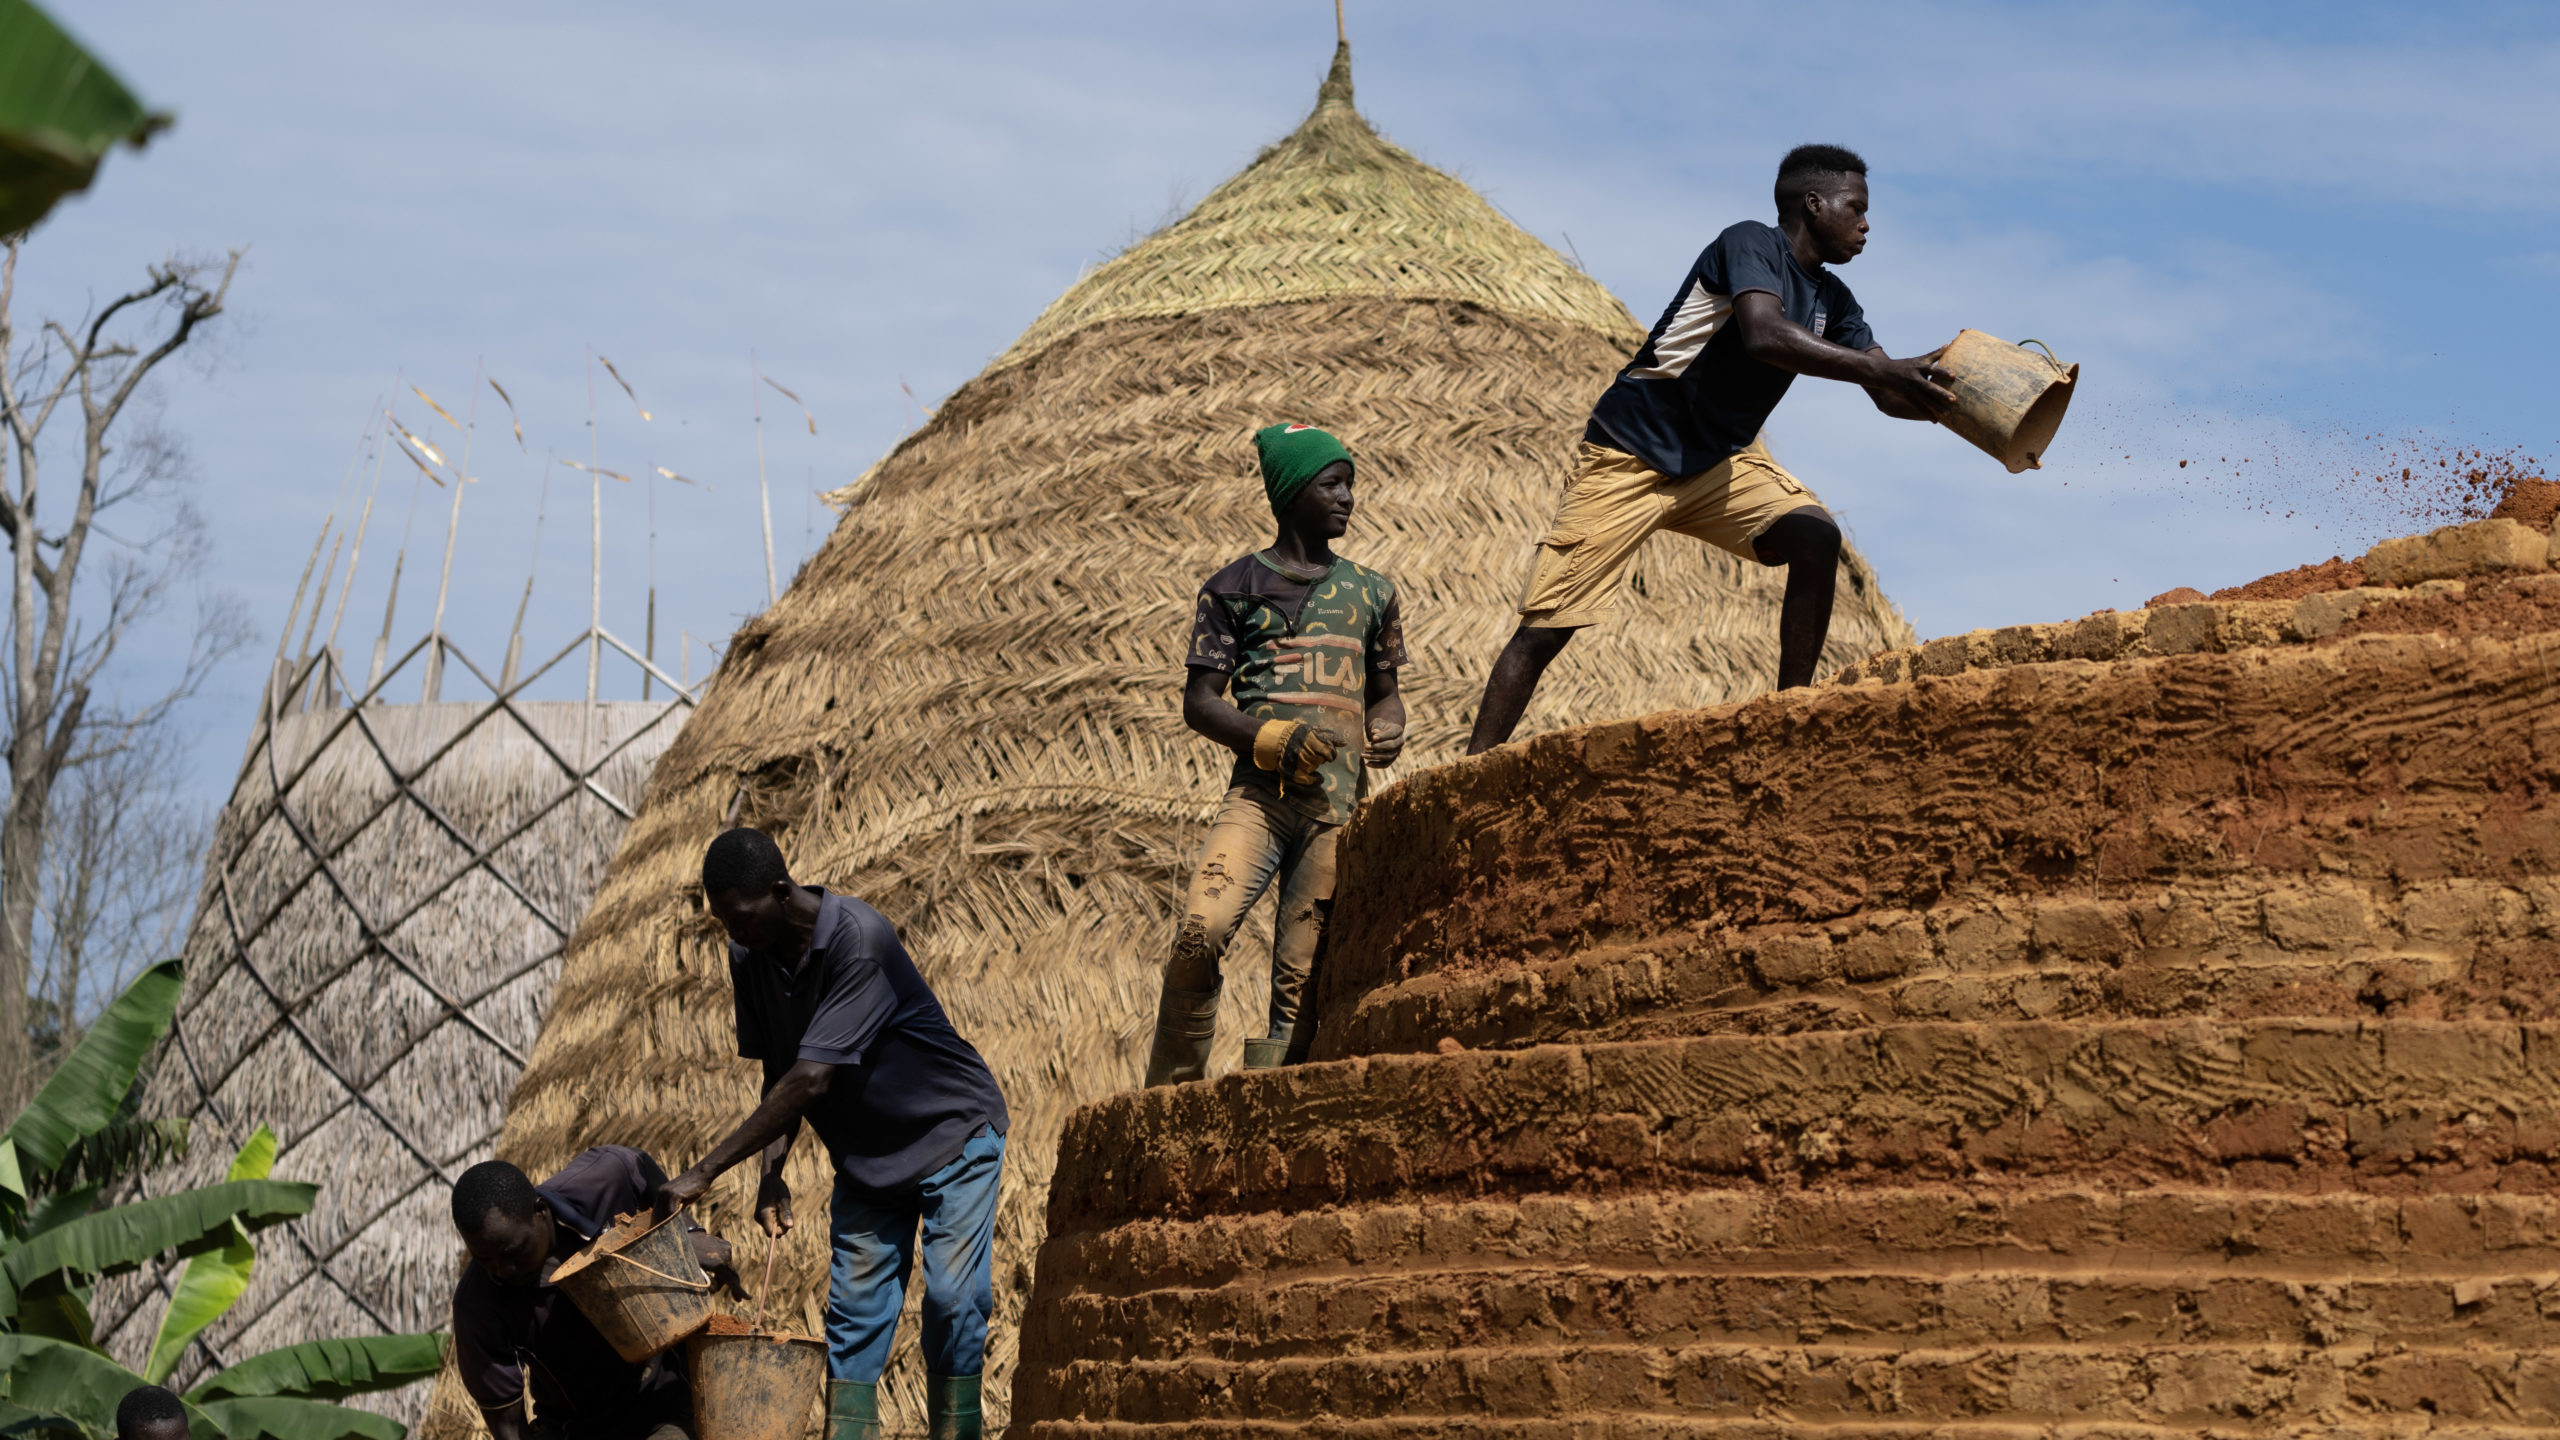 Crews work to build a Warka Tower, which captures condensation to provide clean water